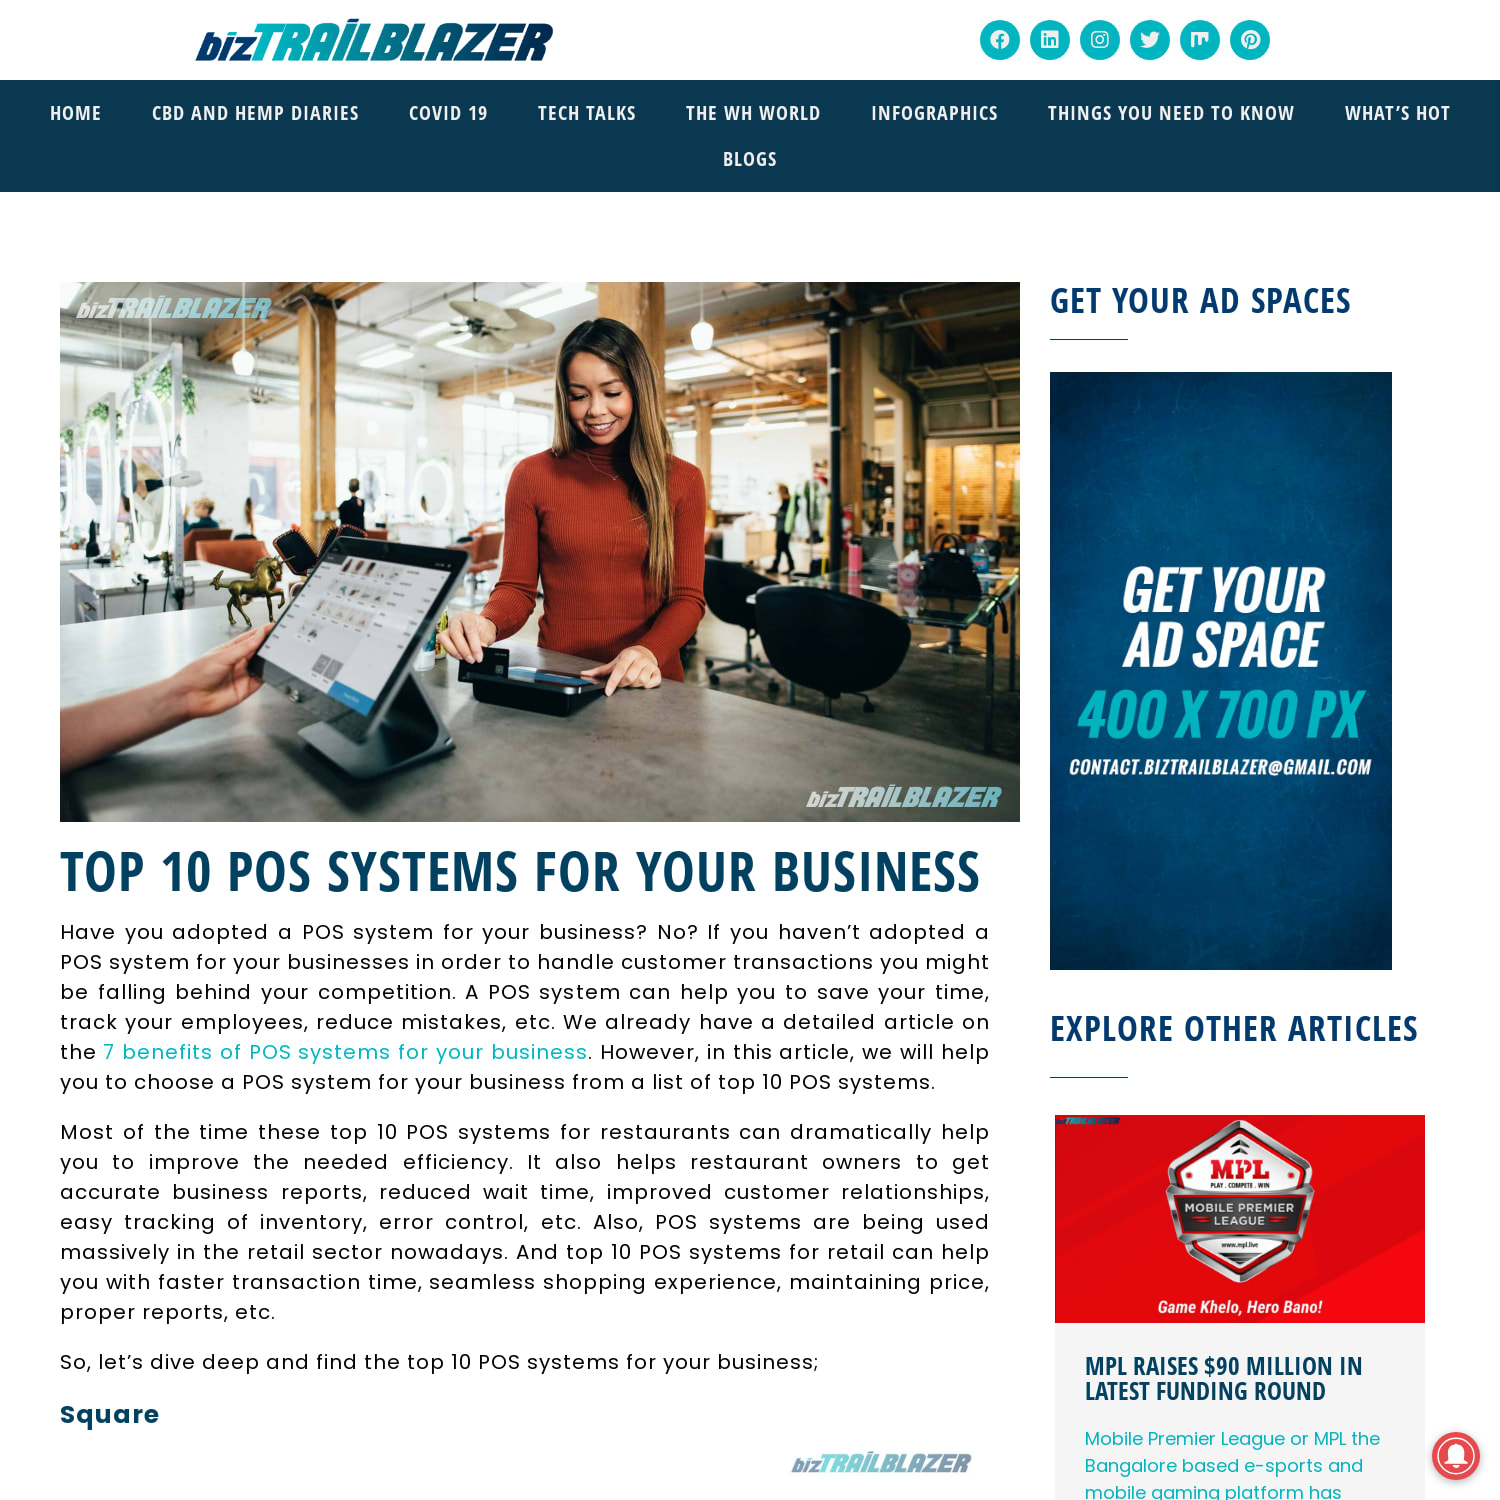 Top 10 POS Systems for Your Business